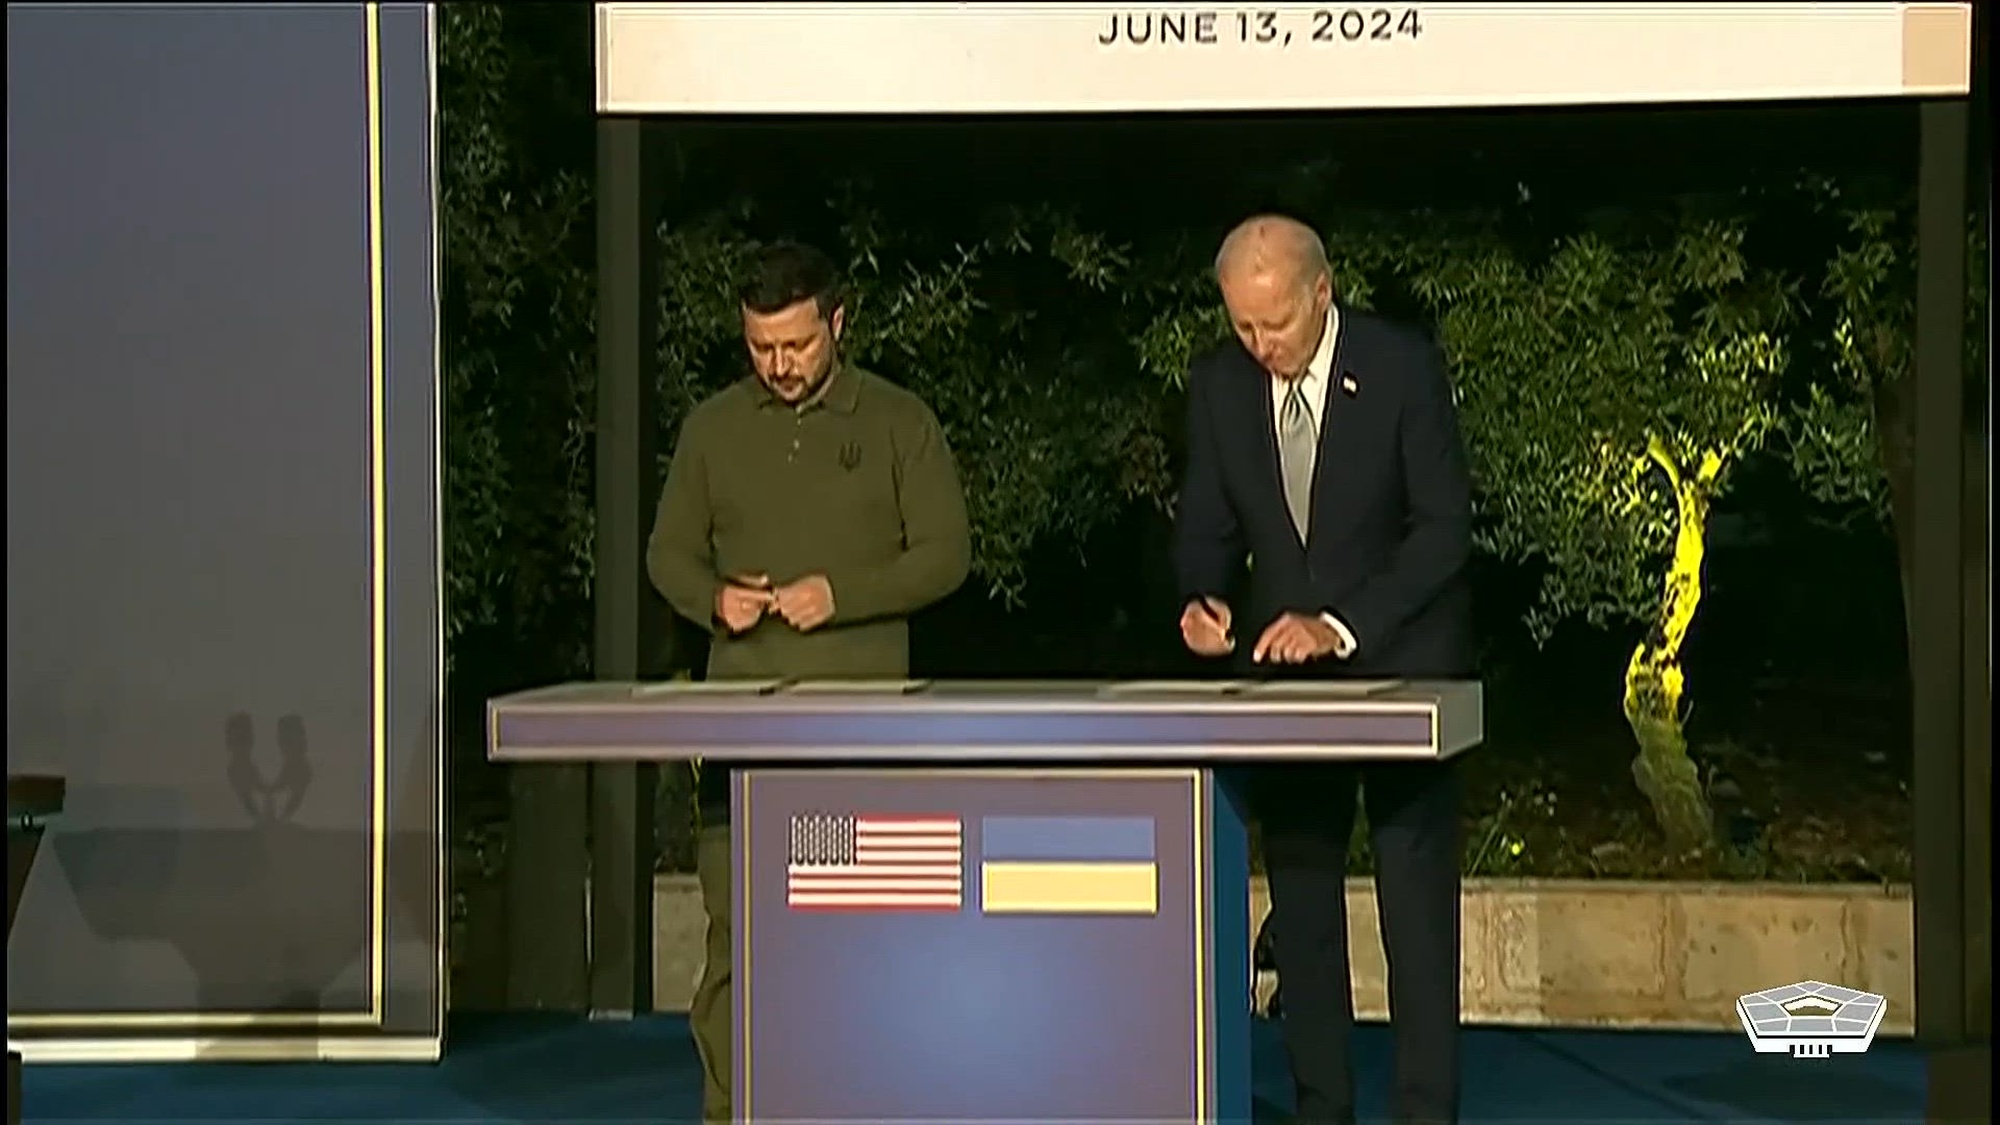 President Joe Biden signs a bilateral security agreement with Ukraine and holds a joint press conference with Ukrainian President Volodymyr Zelenskyy at the G7 Summit in Fasano, Italy.